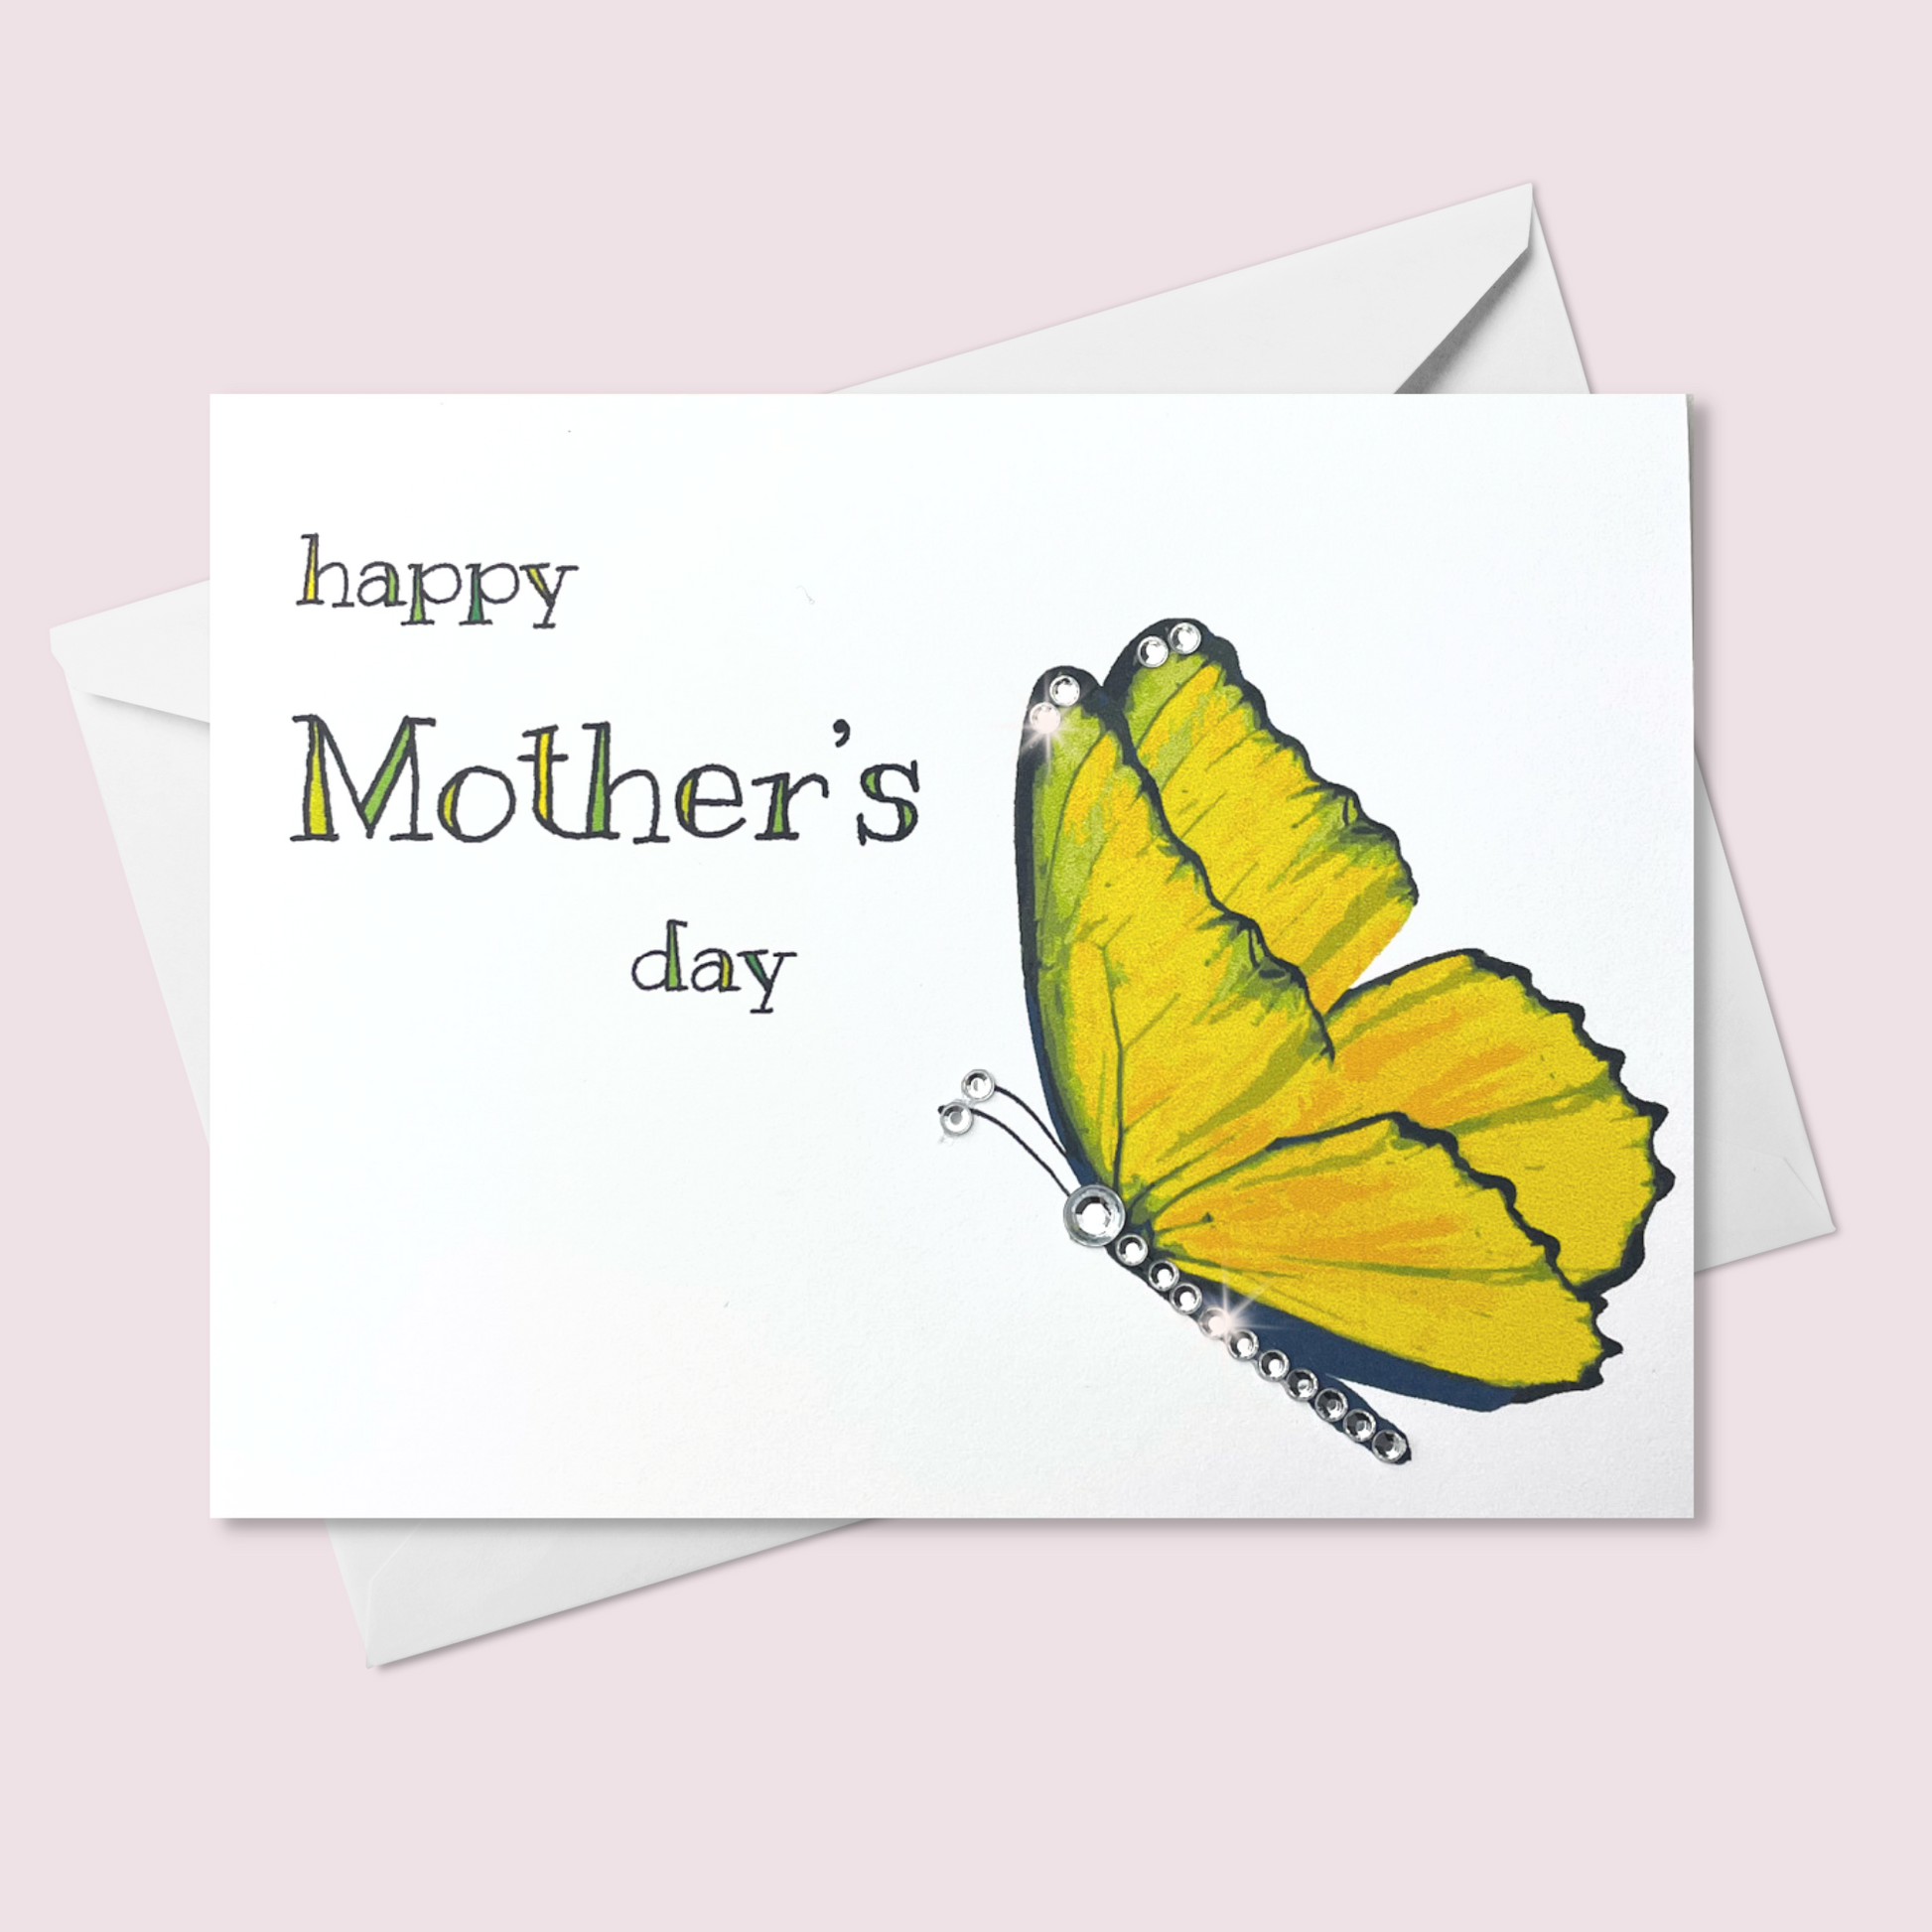 happy mother's day yellow butterfly